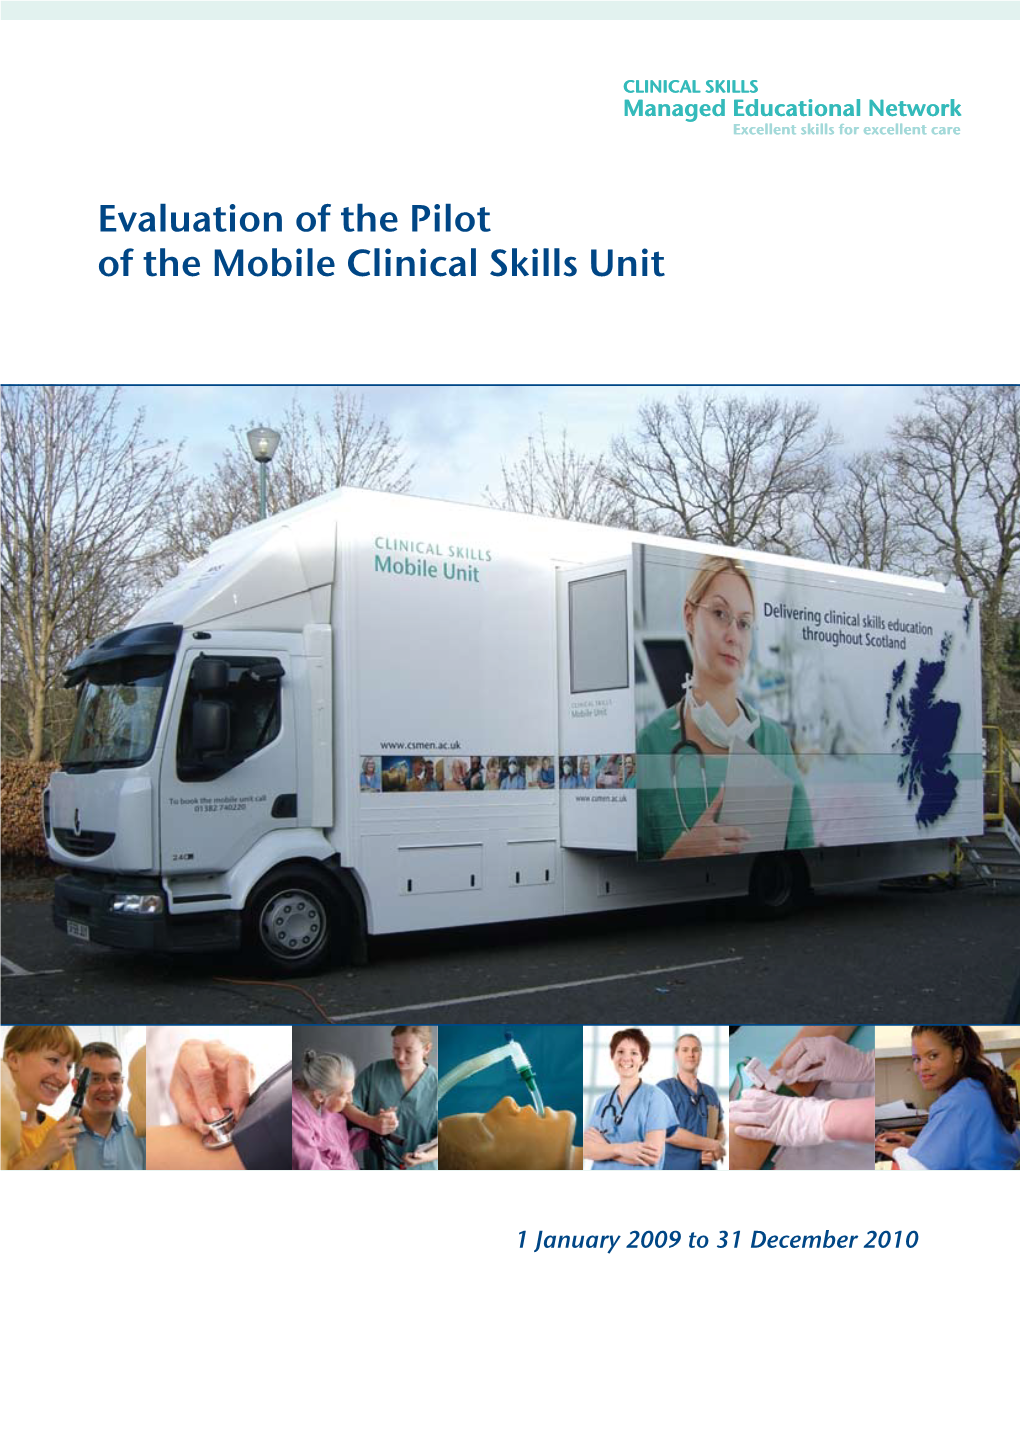 Evaluation of the Pilot of the Mobile Clinical Skills Unit Clinical Skills Managed Educational Network